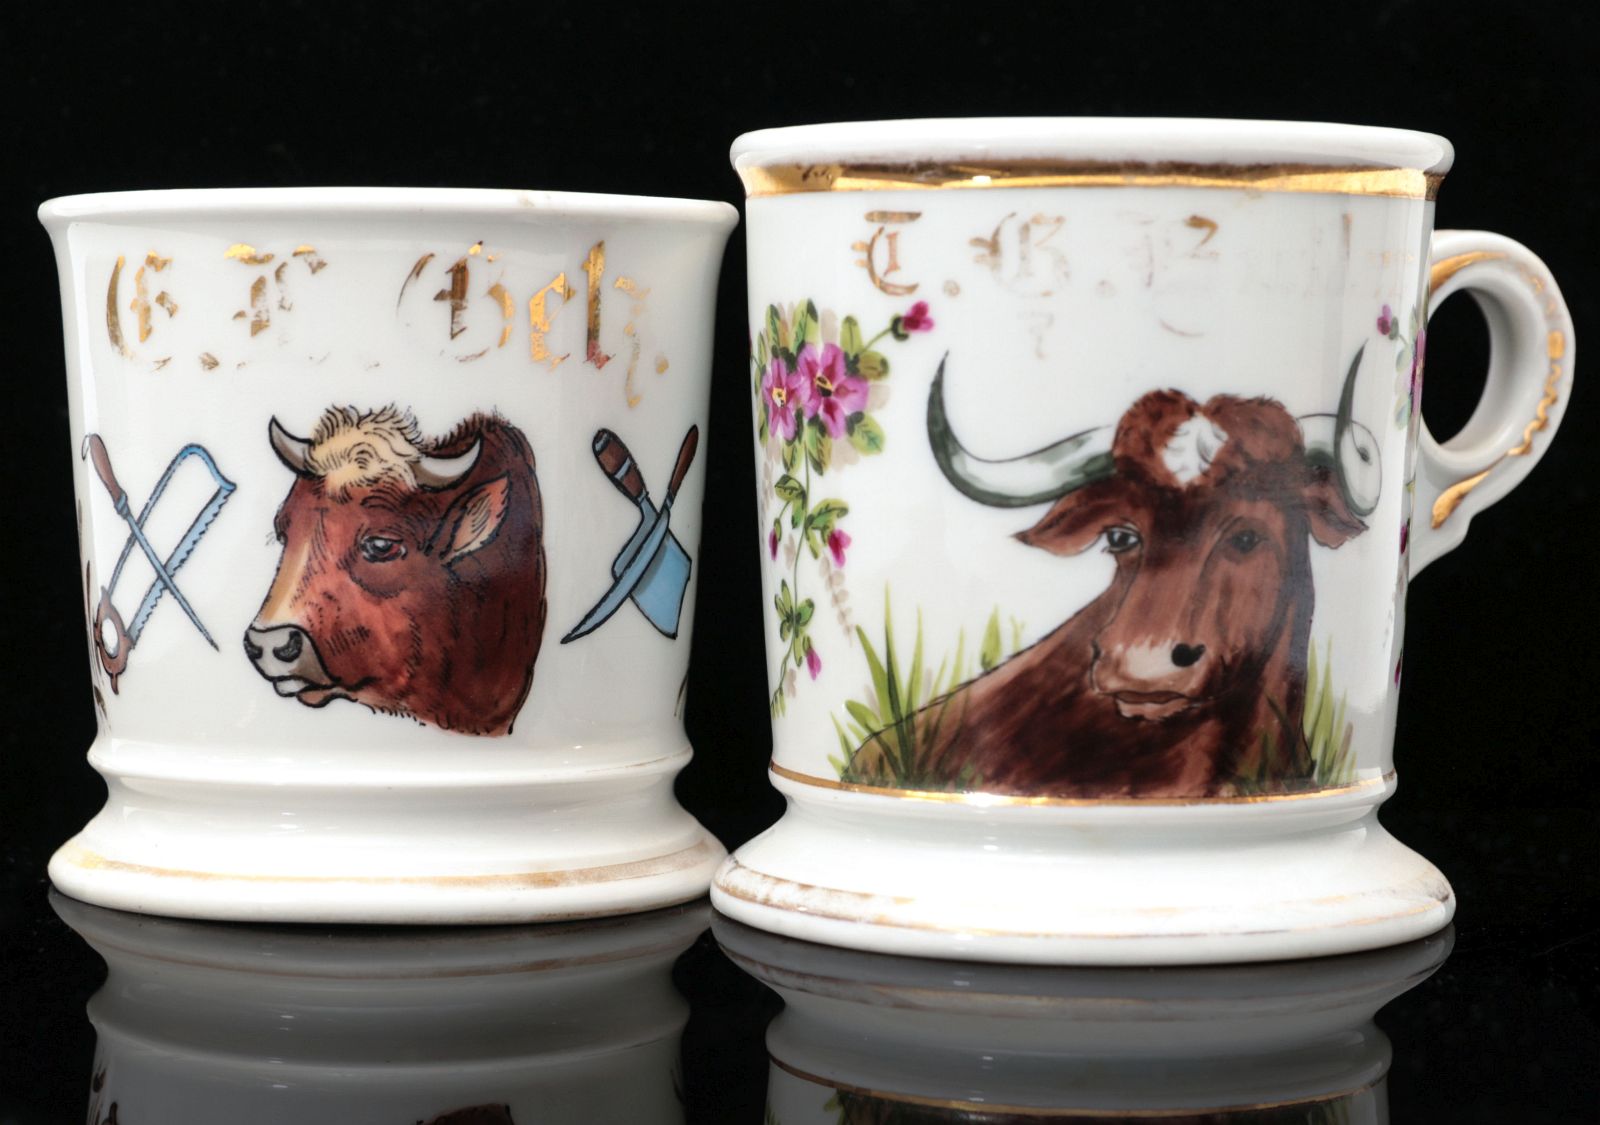 BUTCHER AND STOCK MAN OCCUPATIONAL SHAVING MUGS